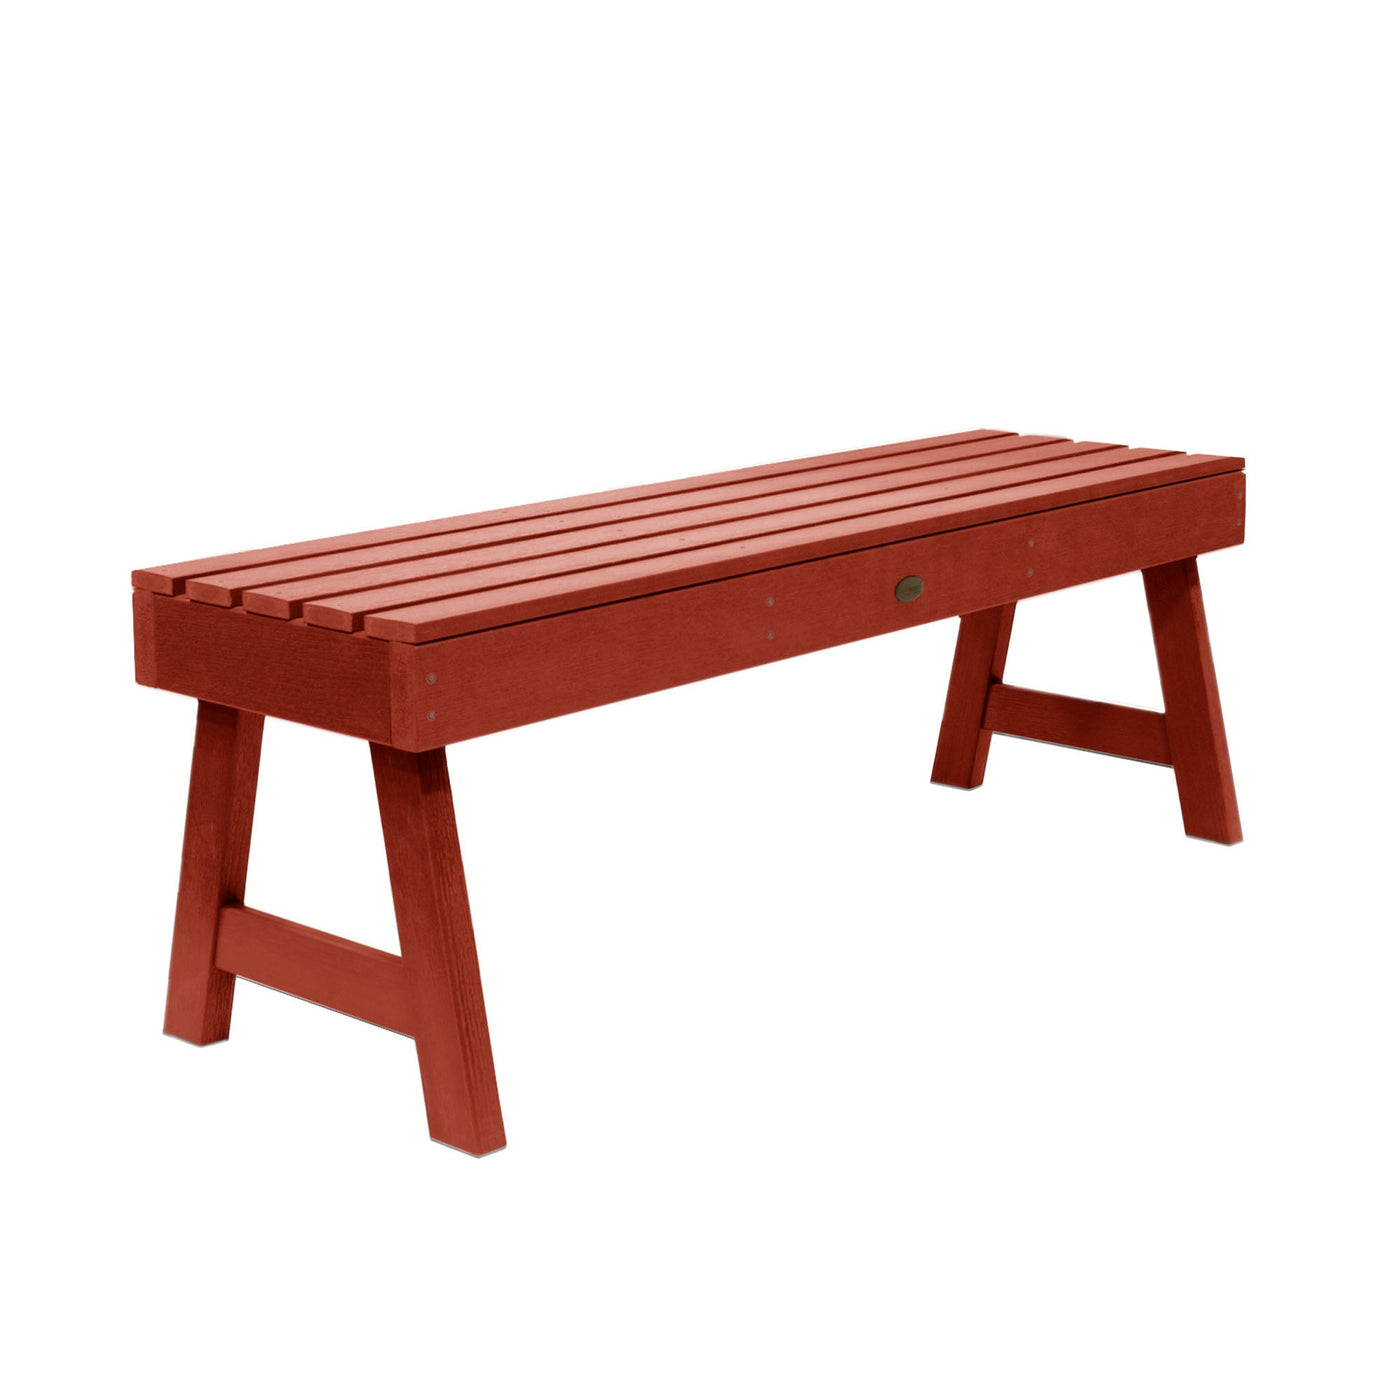 Weatherly Picnic Backless Bench - 4ft Bench Highwood USA Rustic Red 